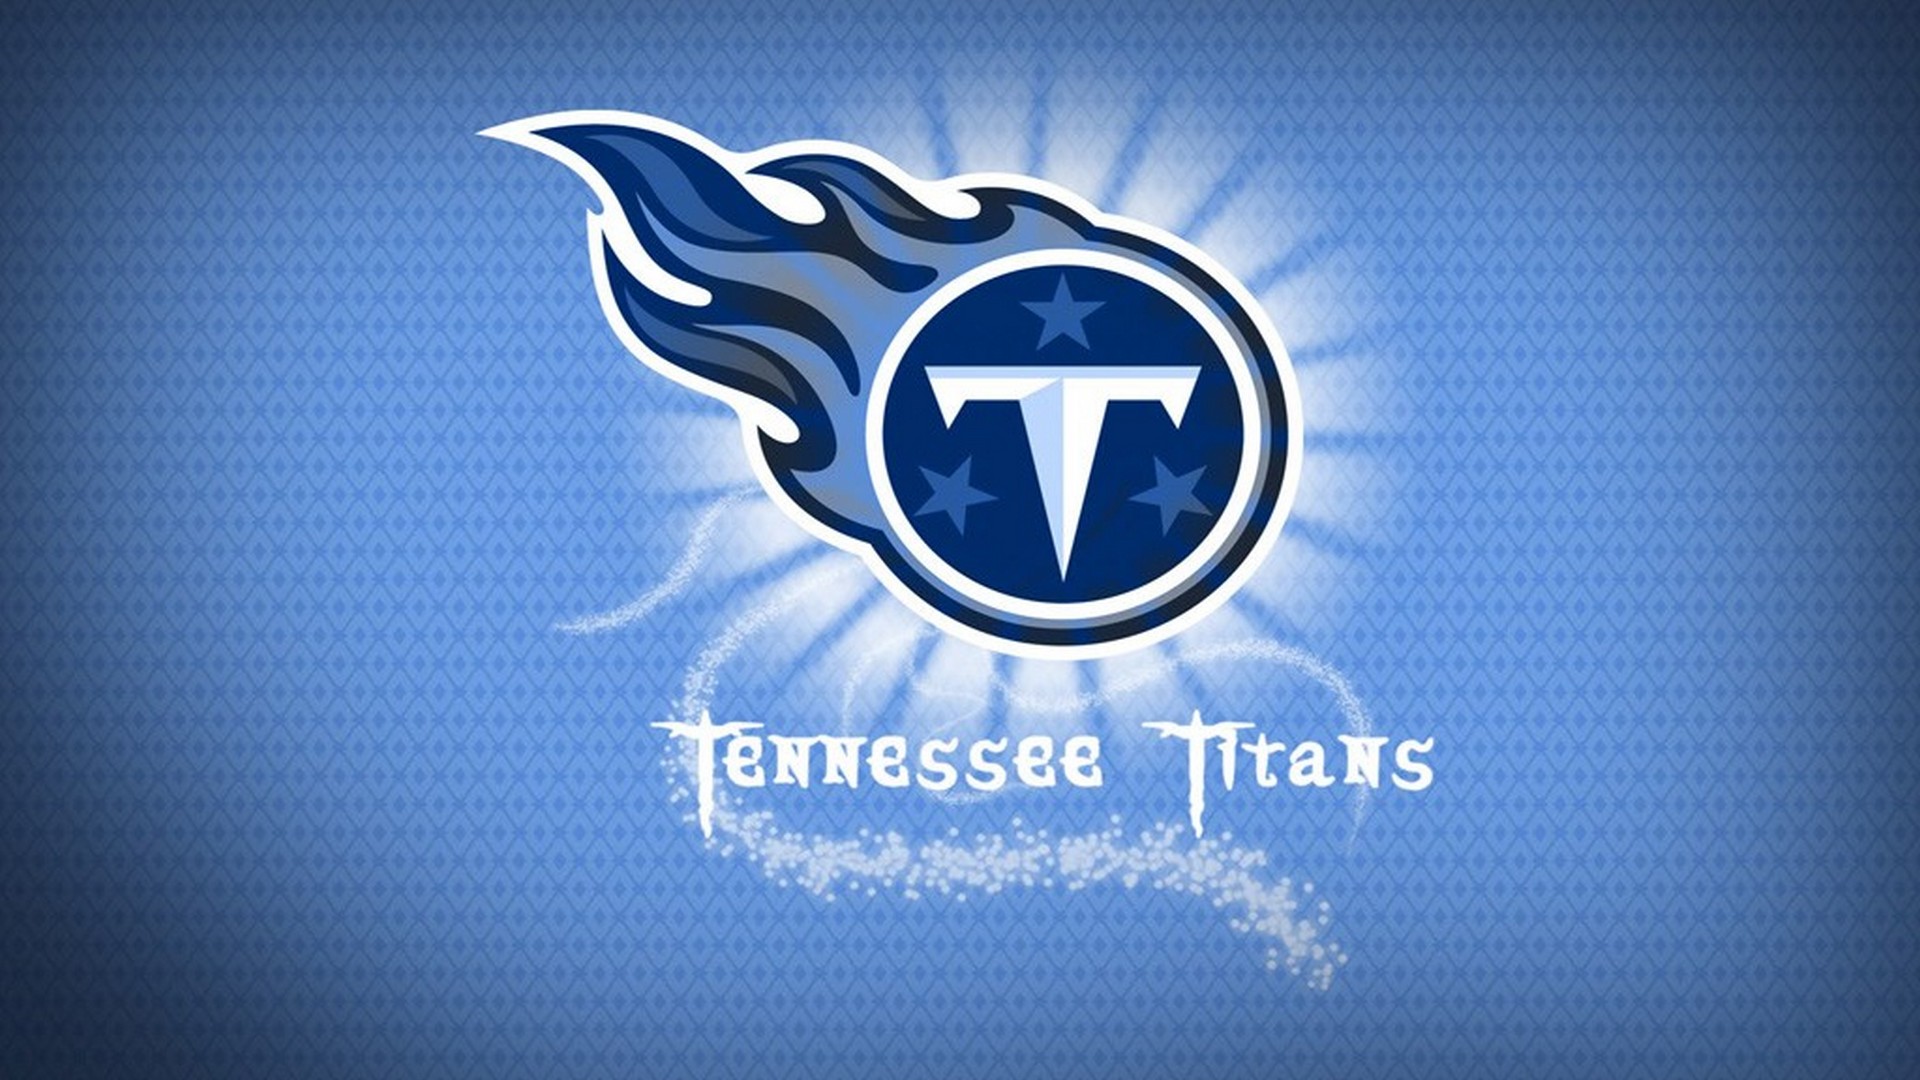 Tennessee Titans Mac Backgrounds With high-resolution 1920X1080 pixel. You can use this wallpaper for your Mac or Windows Desktop Background, iPhone, Android or Tablet and another Smartphone device